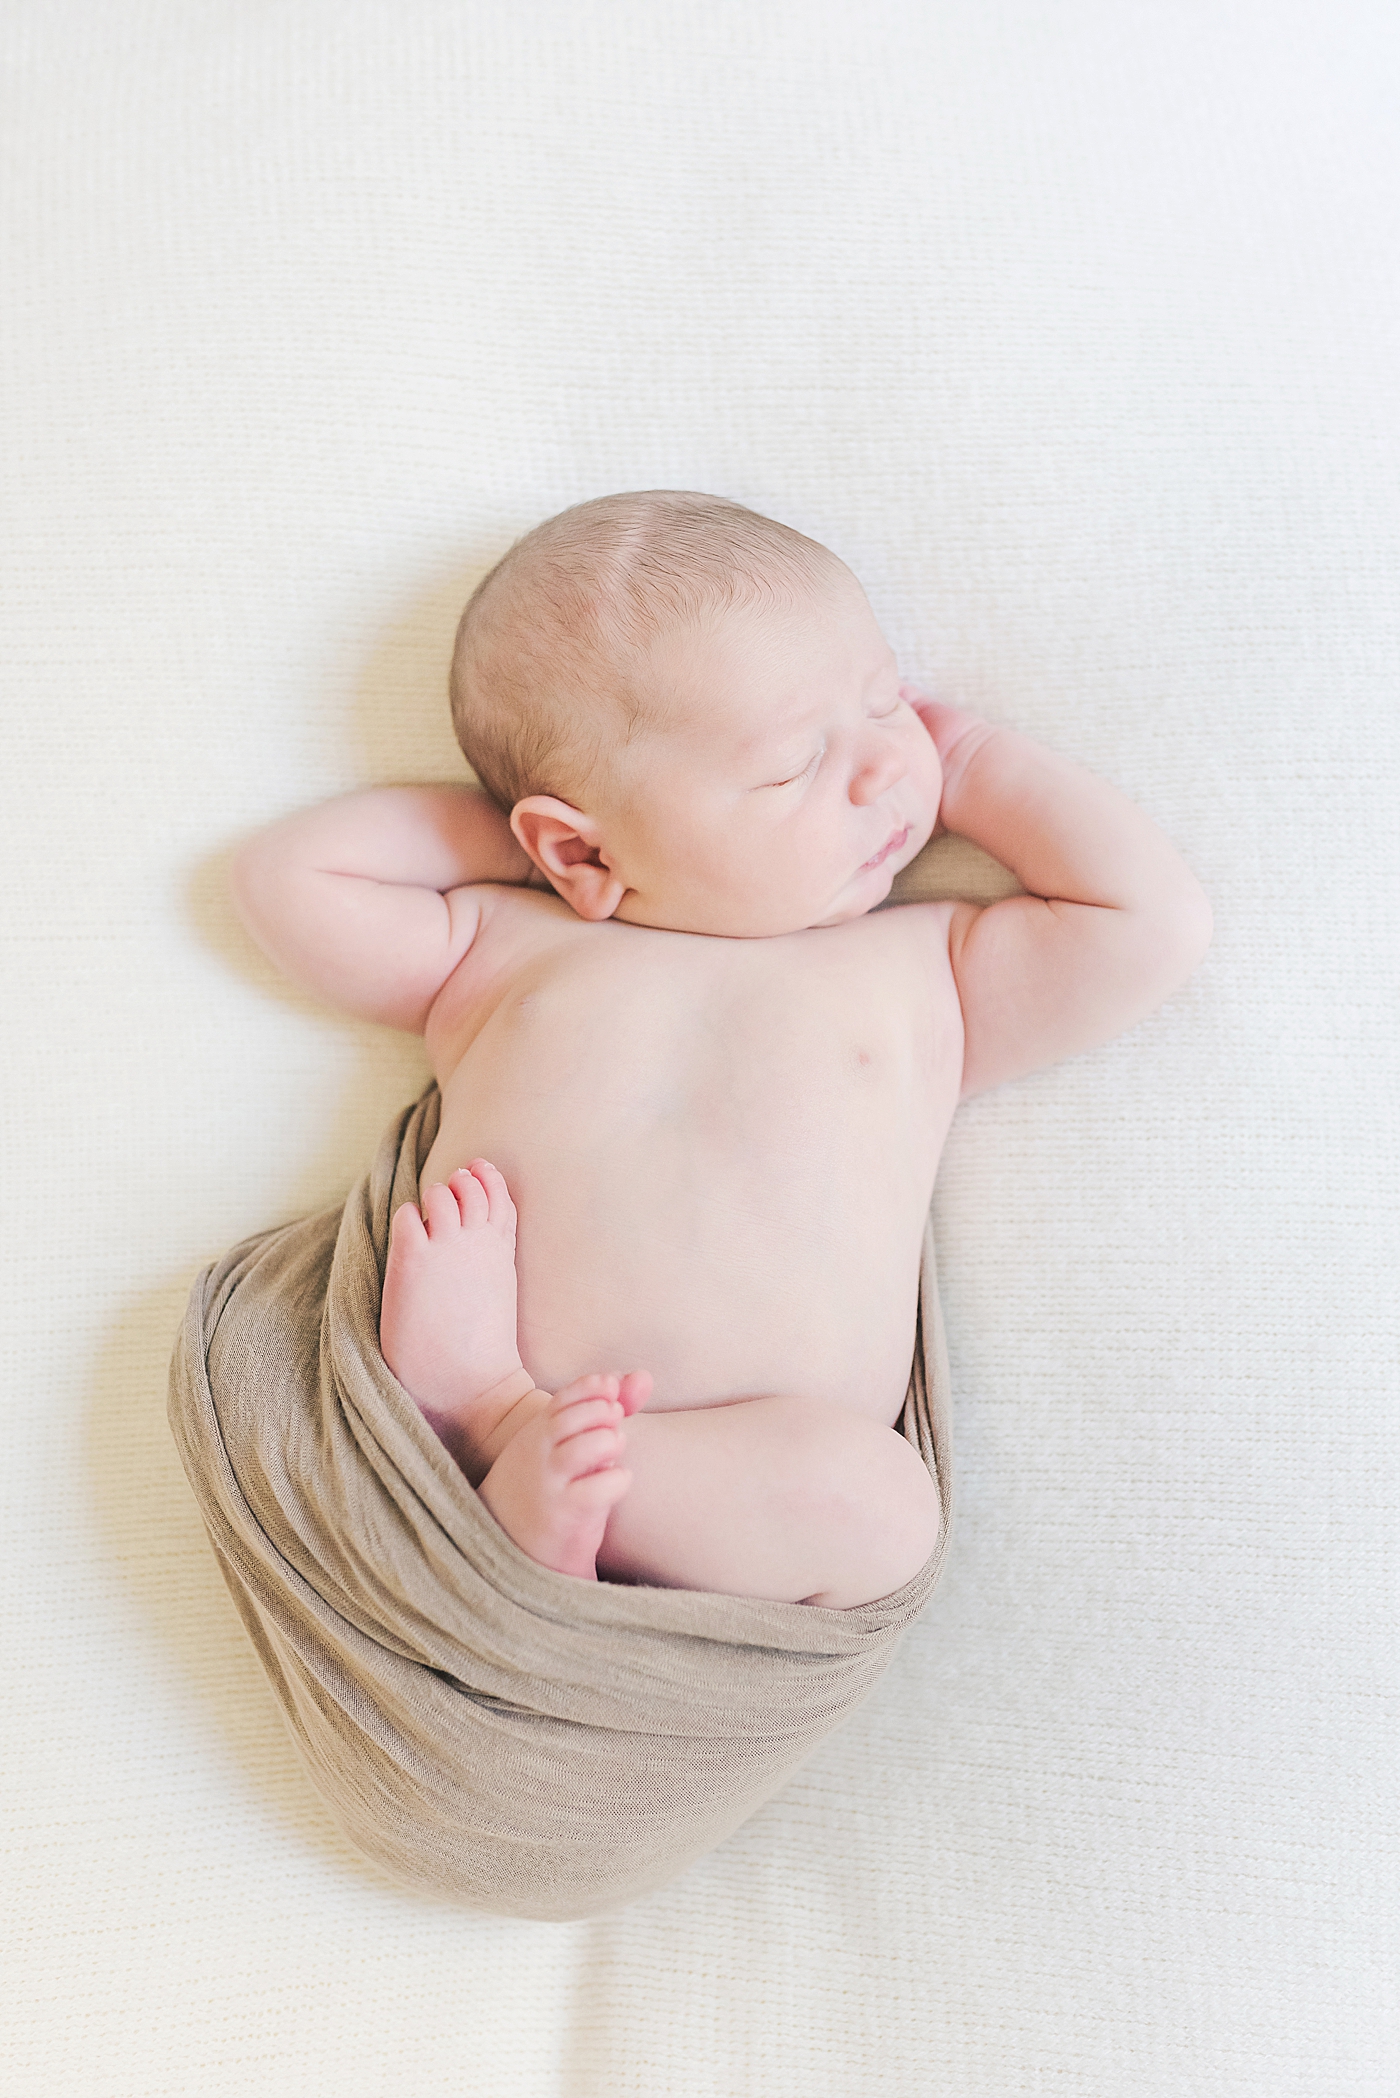 Baby boy in a light brown swaddle | Photo by Anna Wisjo Photography